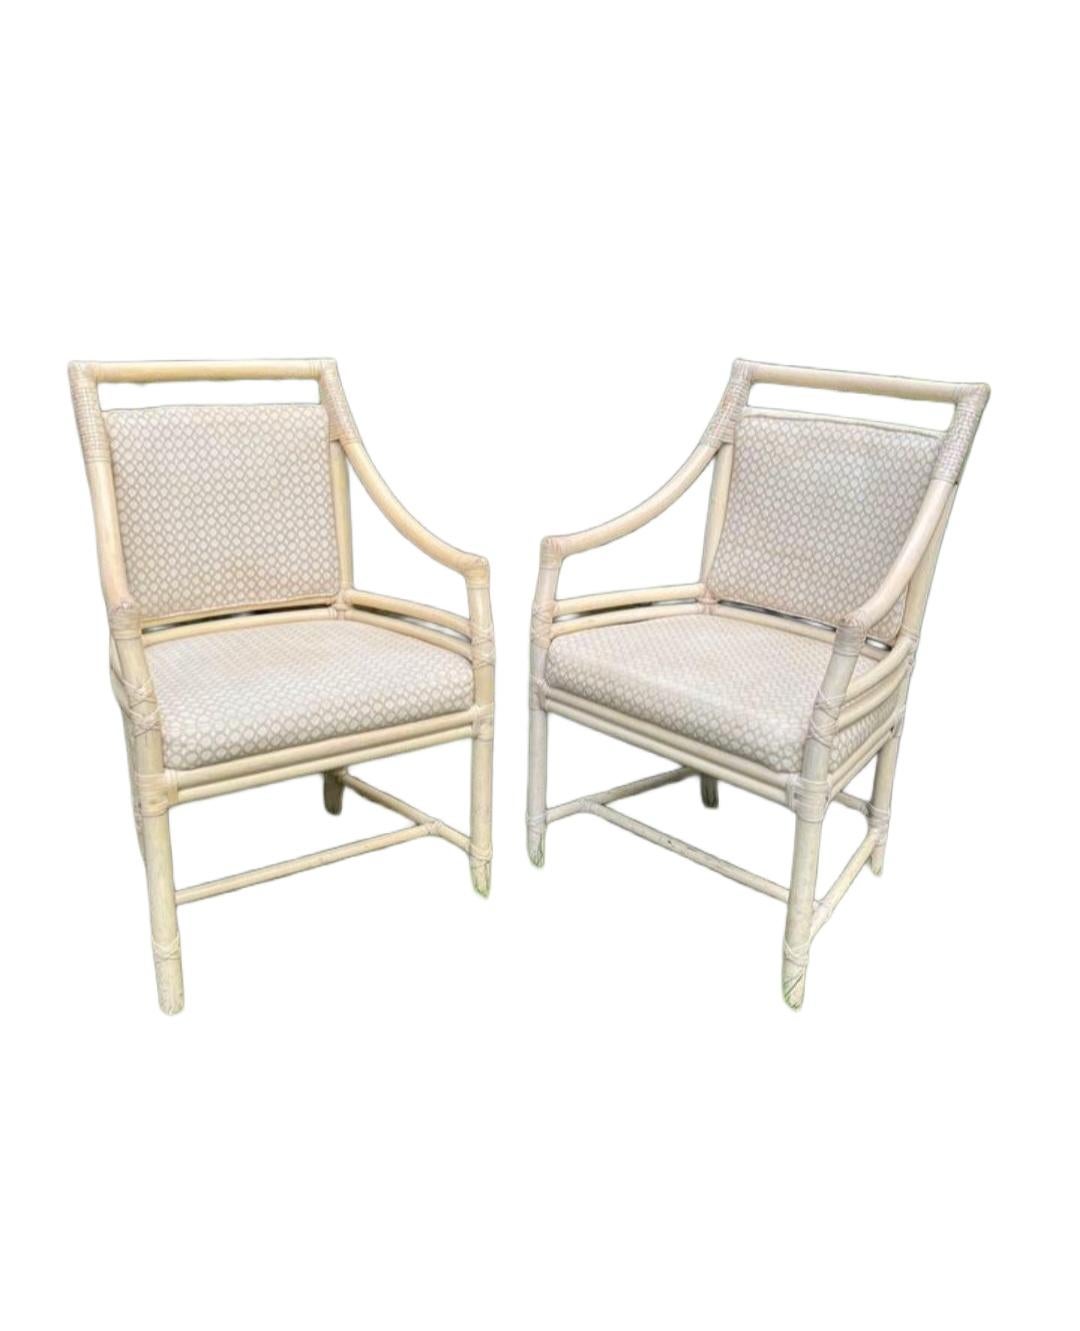 American McGuire Pair of Arm Lounge Chairs For Sale